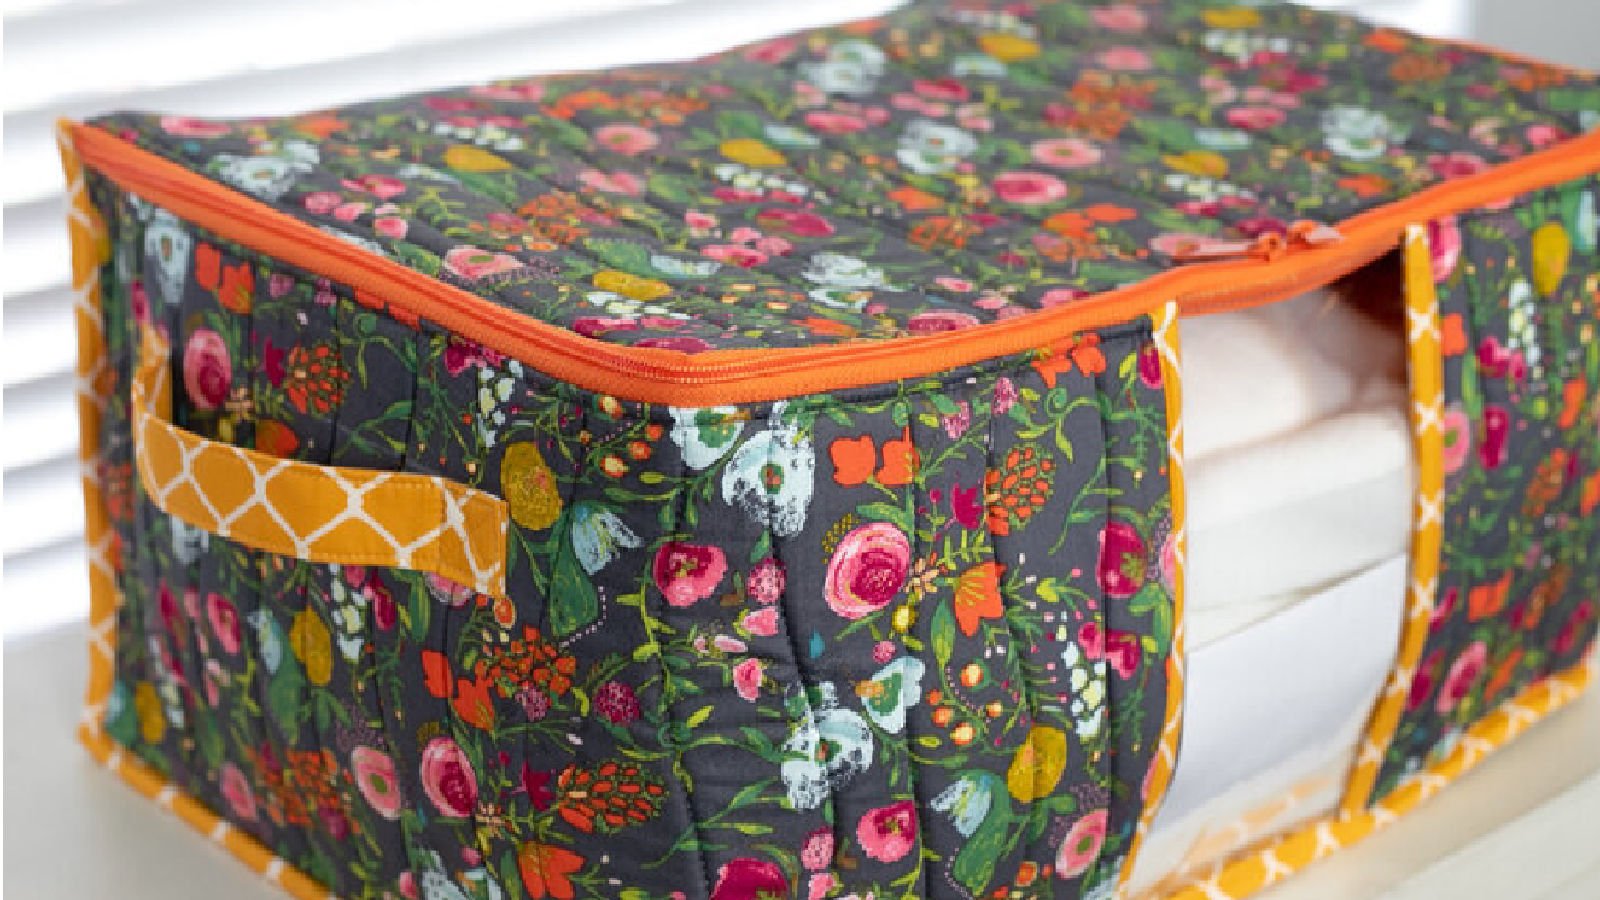 <p>Another way to make a zipper pouch big enough for home storage is the <a href="https://sewcanshe.com/diy-sturdy-storage-totes-free-sewing-pattern-in-2-sizes/" rel="noreferrer noopener">DIY Sturdy Storage Tote</a>. I keep towels and quilts inside these in my closet.</p>